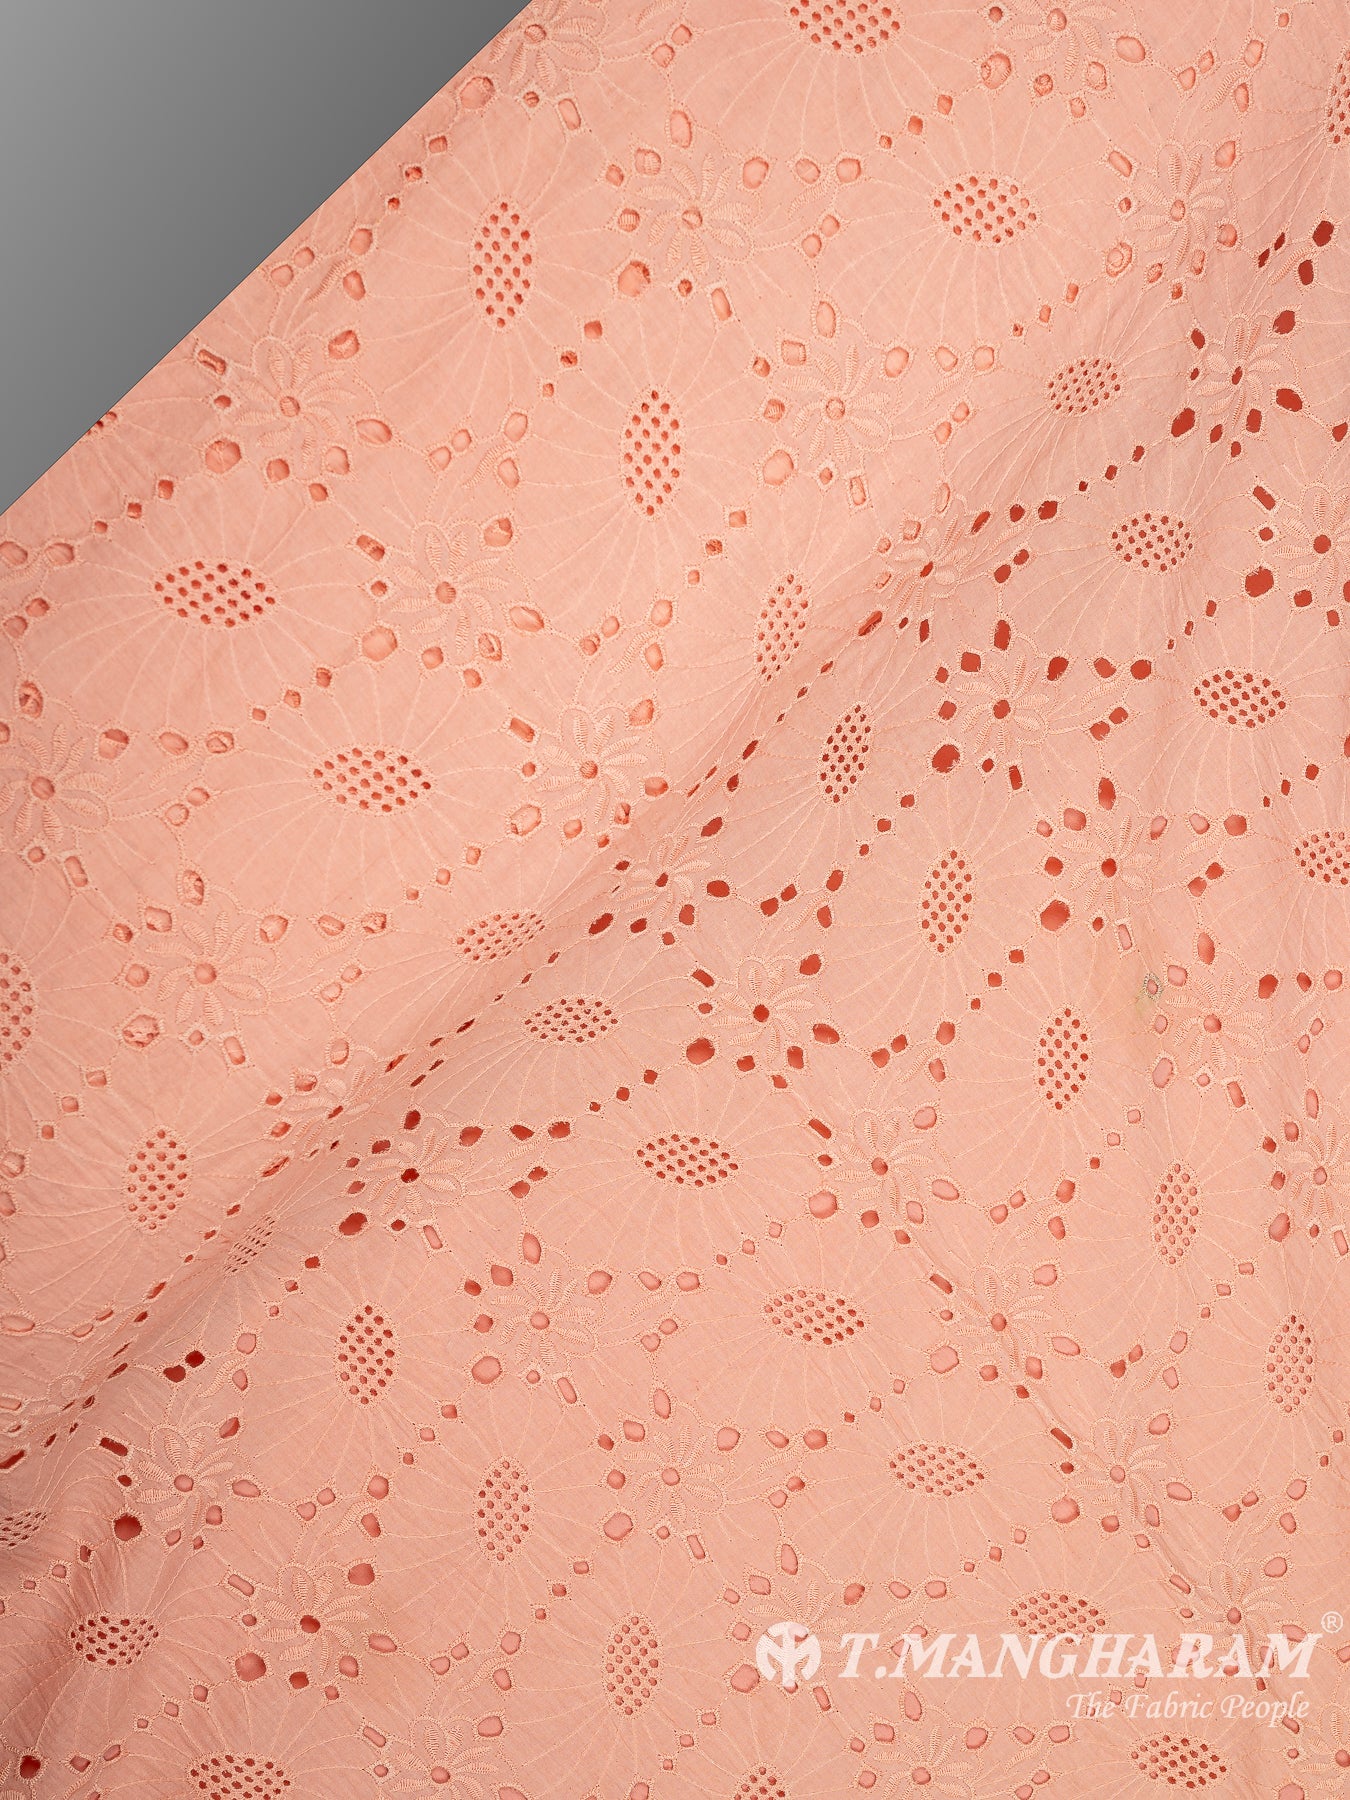 Peach Cotton Embroidery Fabric - EC8597 view-2